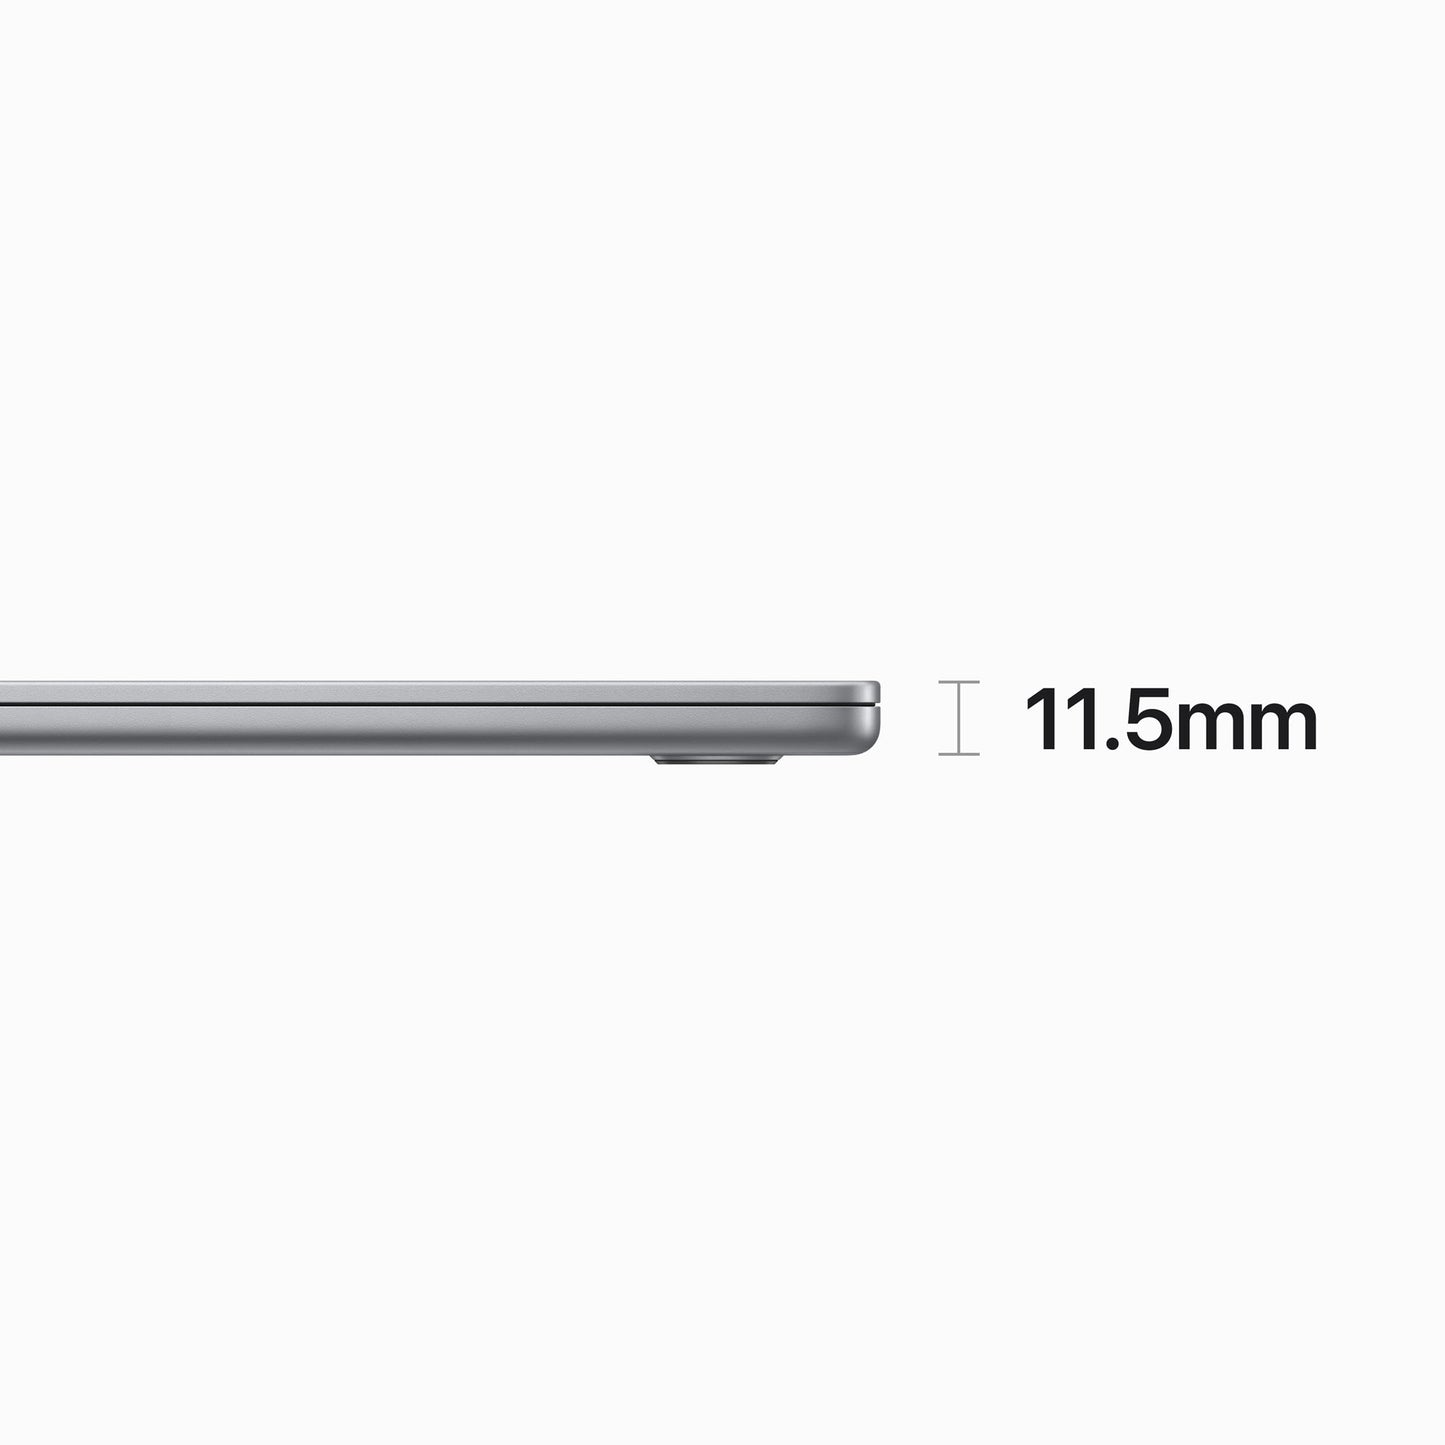 15-inch MacBook Air: Apple M2 chip with 8‑core CPU and 10‑core GPU, 512GB SSD - Space Gray